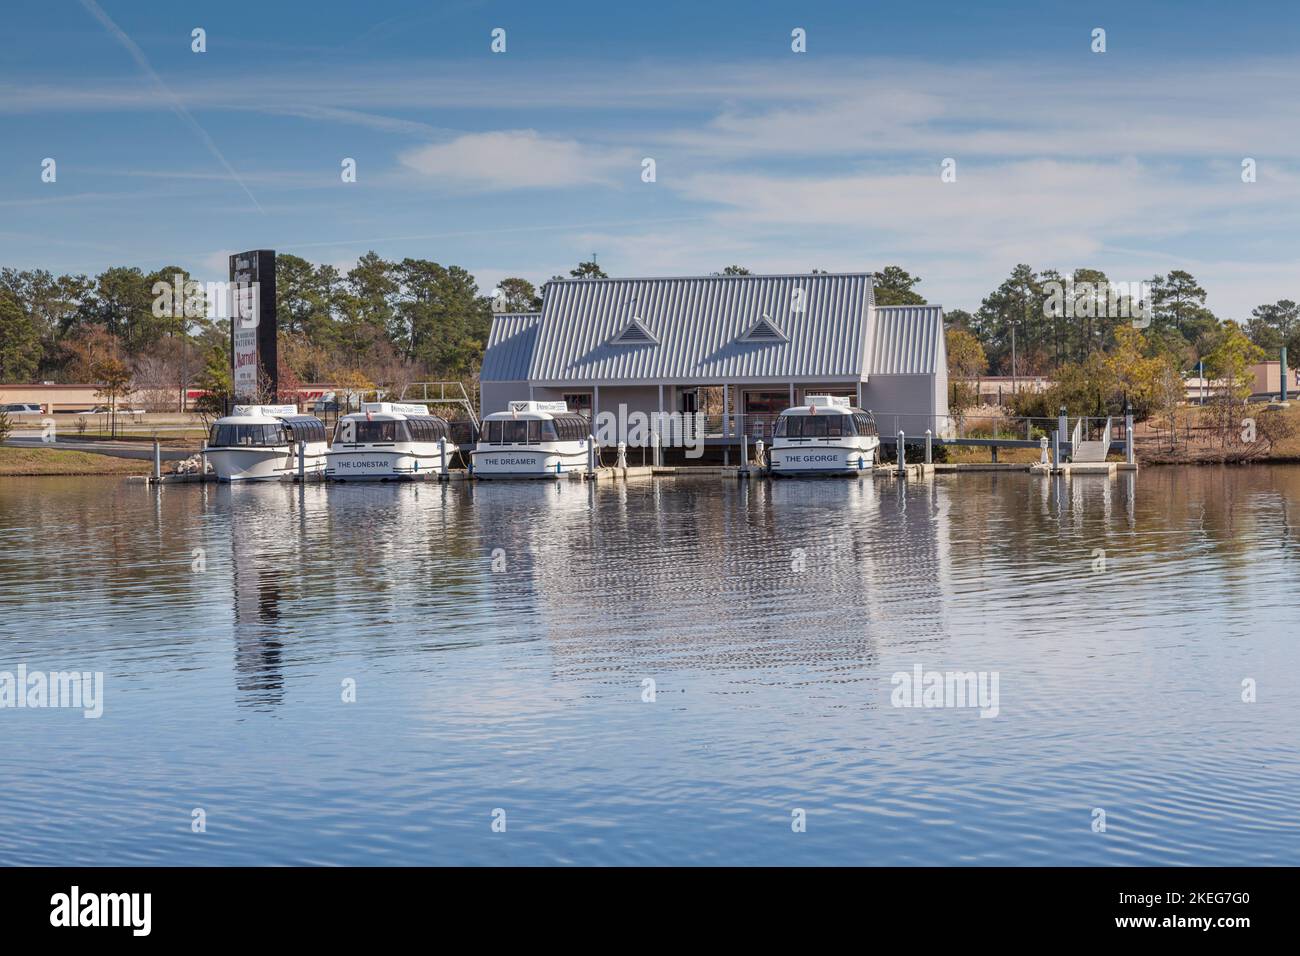 Boat dock on the Woodlands Waterway, for the Water Taxi transportation service. Stock Photo